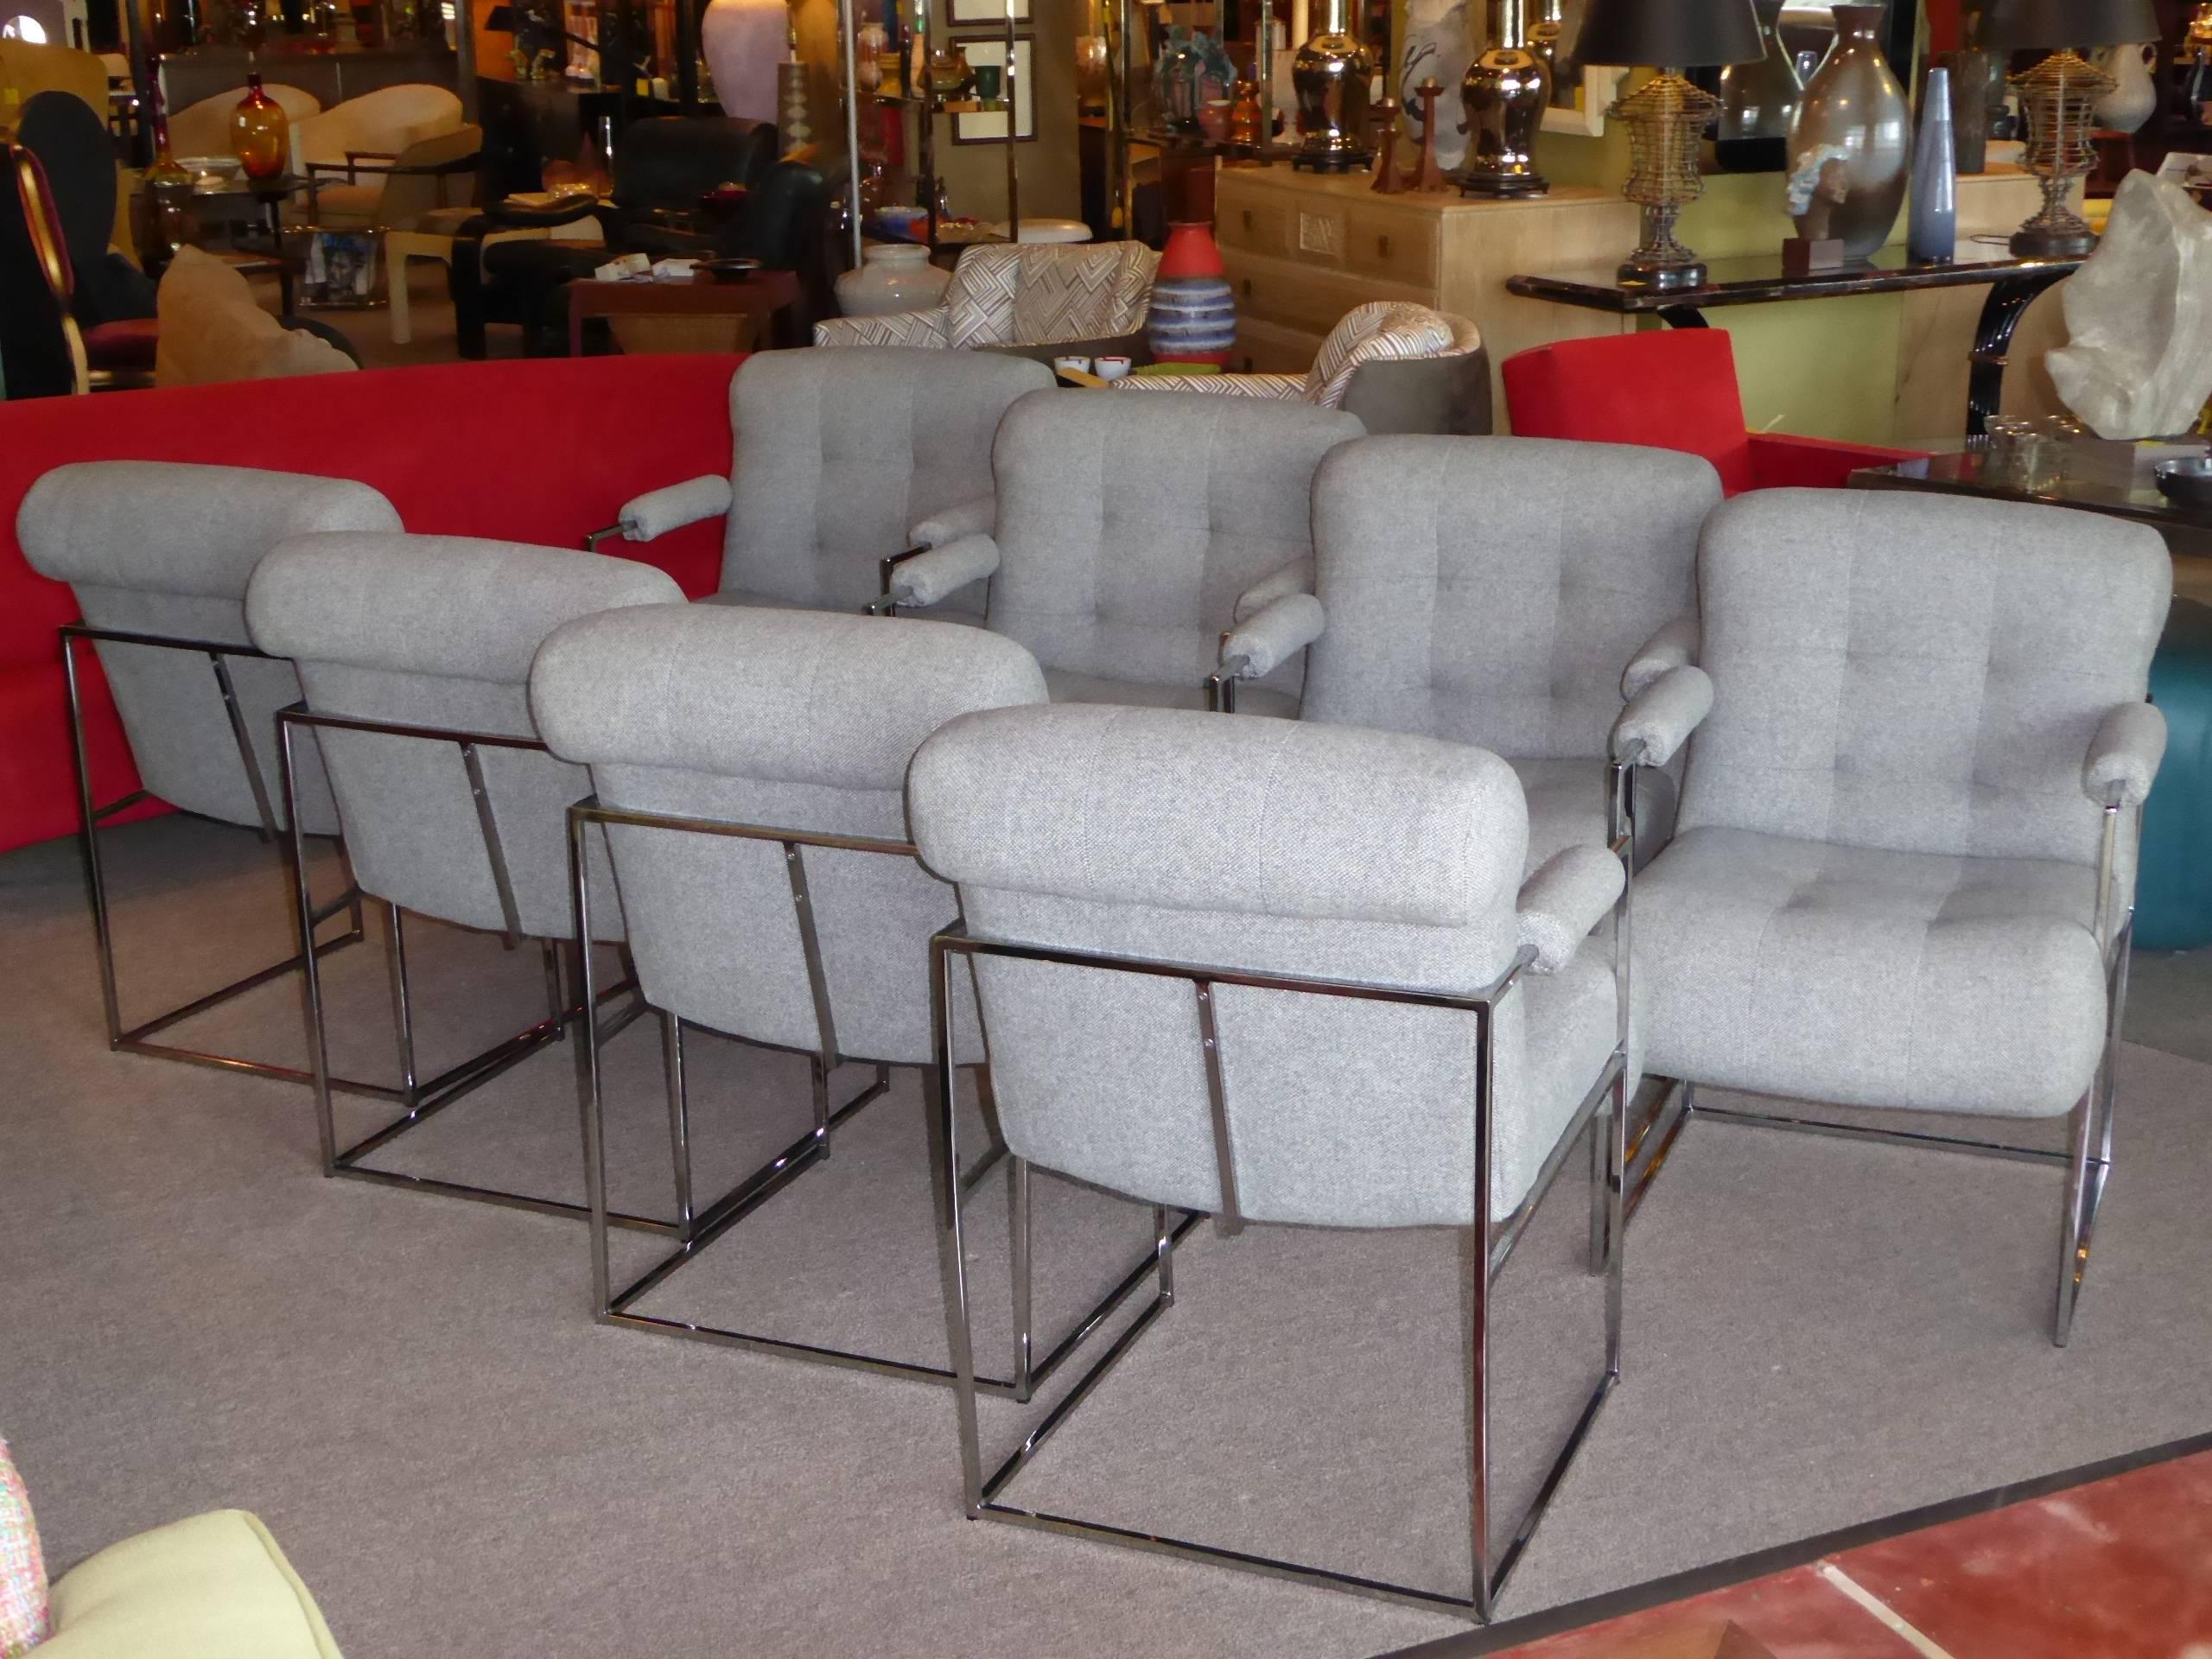 REDUCED FROM $11,000.....In their original grey tweed fabric, blind tufted and plush rolled edge upholstered seats, these eight Milo Baughman armed dining chairs are a classic delight. Excellent chrome finish tubular frames and the fabric are in